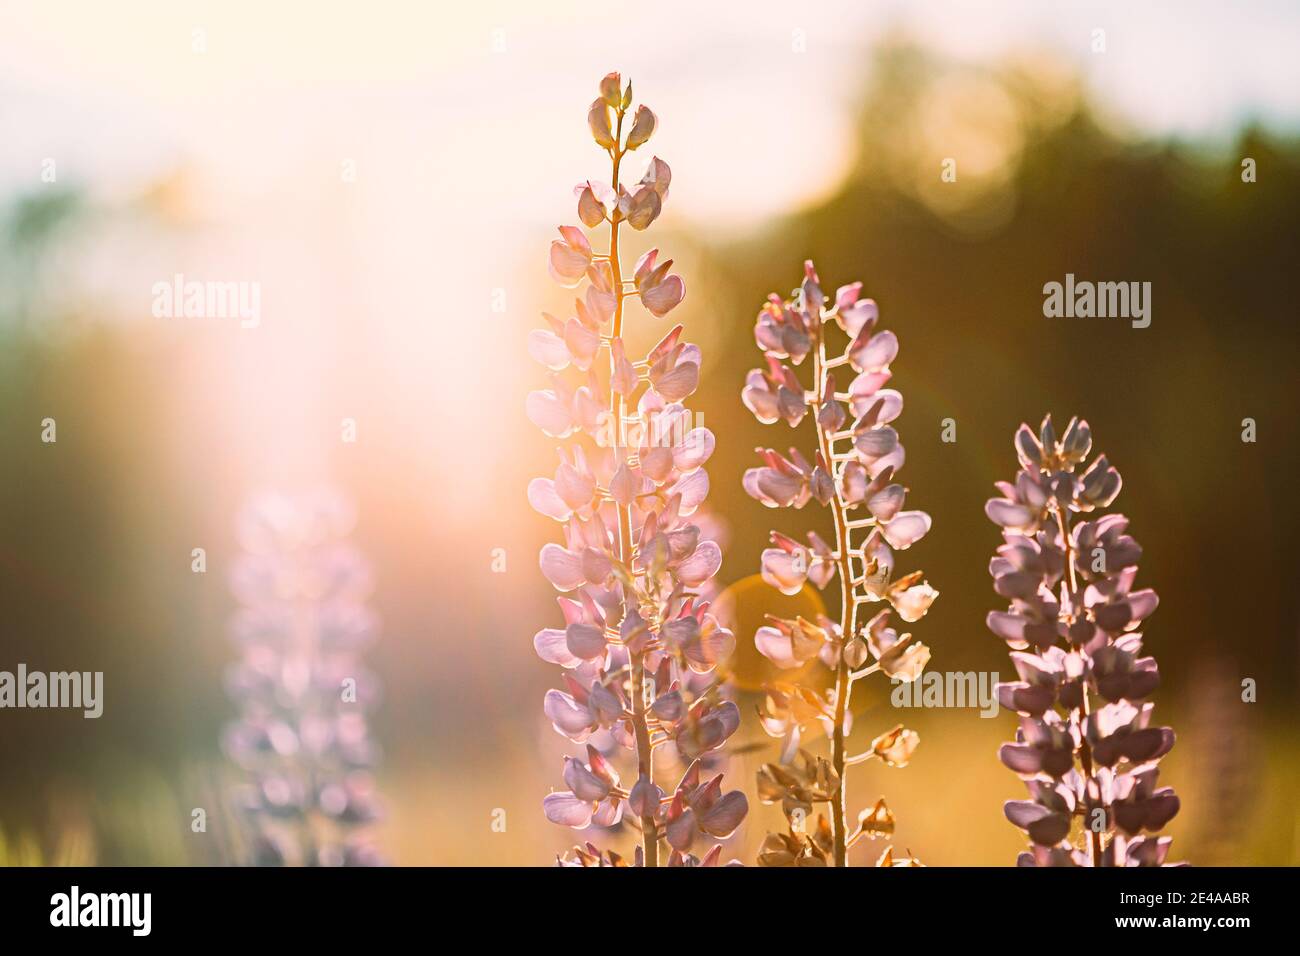 Wild Flowers Lupine In Summer Meadow At Sunset Sunrise. Lupinus, Commonly Known As Lupin Or Lupine, Is A Genus Of Flowering Plants In Legume Family Stock Photo